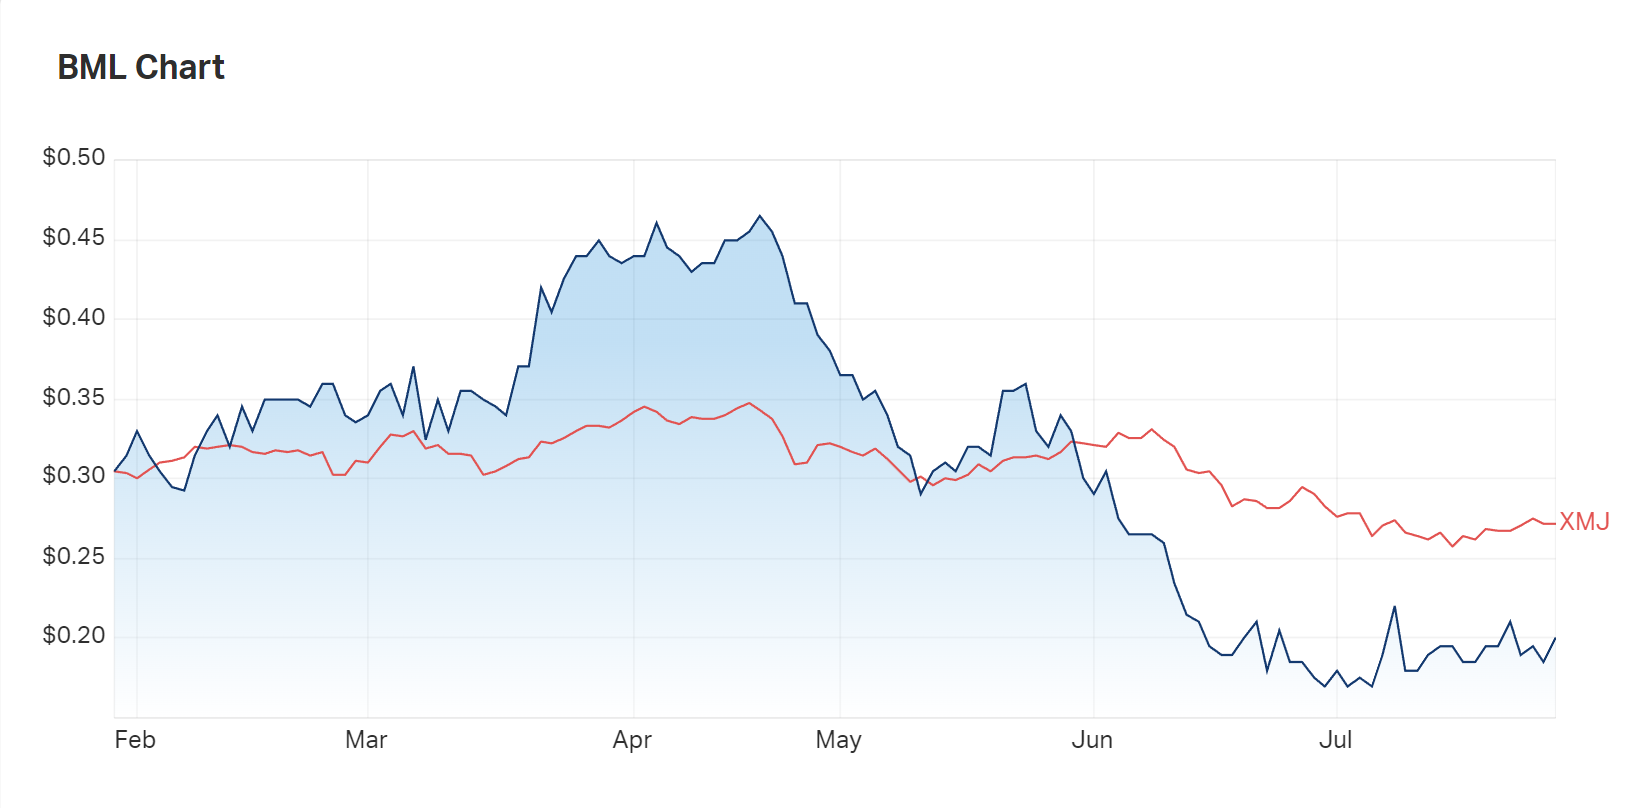 A look at Boab's six month charts shows the company was outperforming the materials index, up until late May. But with a decision to mine on the horizon, and an already huge silver resource, is Boab undervalued?